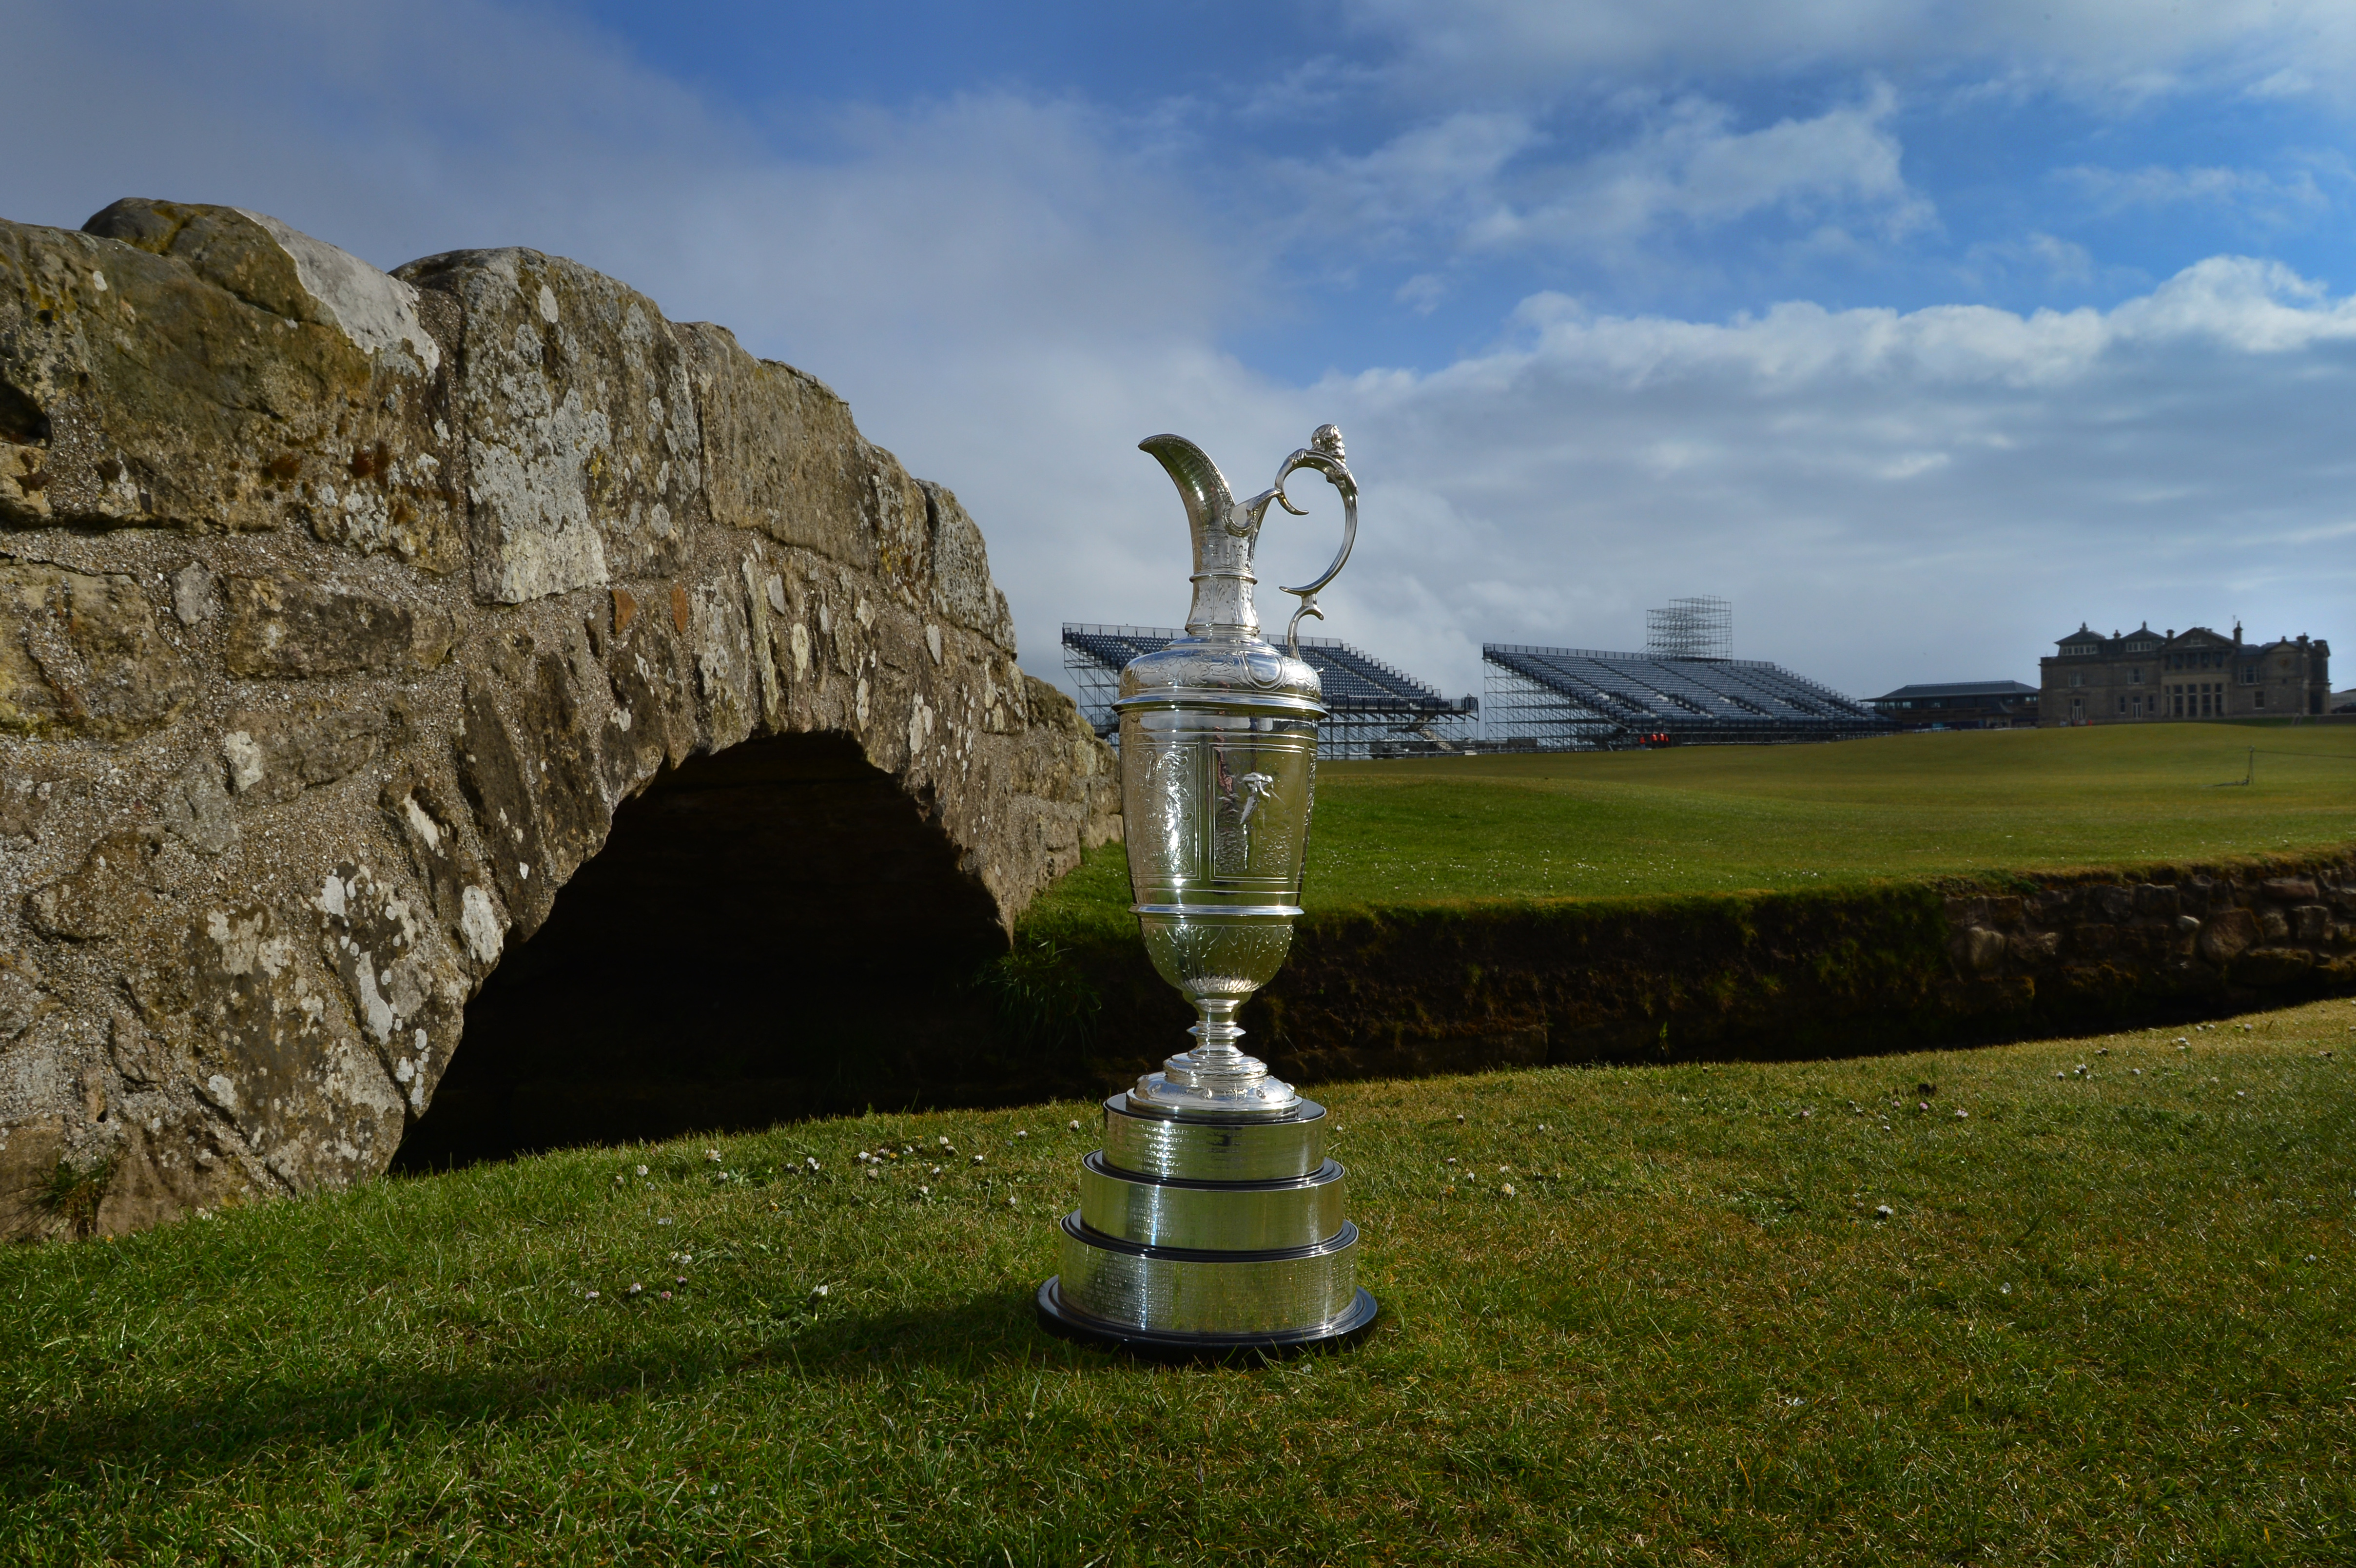 The Claret Jug has arrived at St Andrews, the "Home of Golf" (Photo: Getty Images)